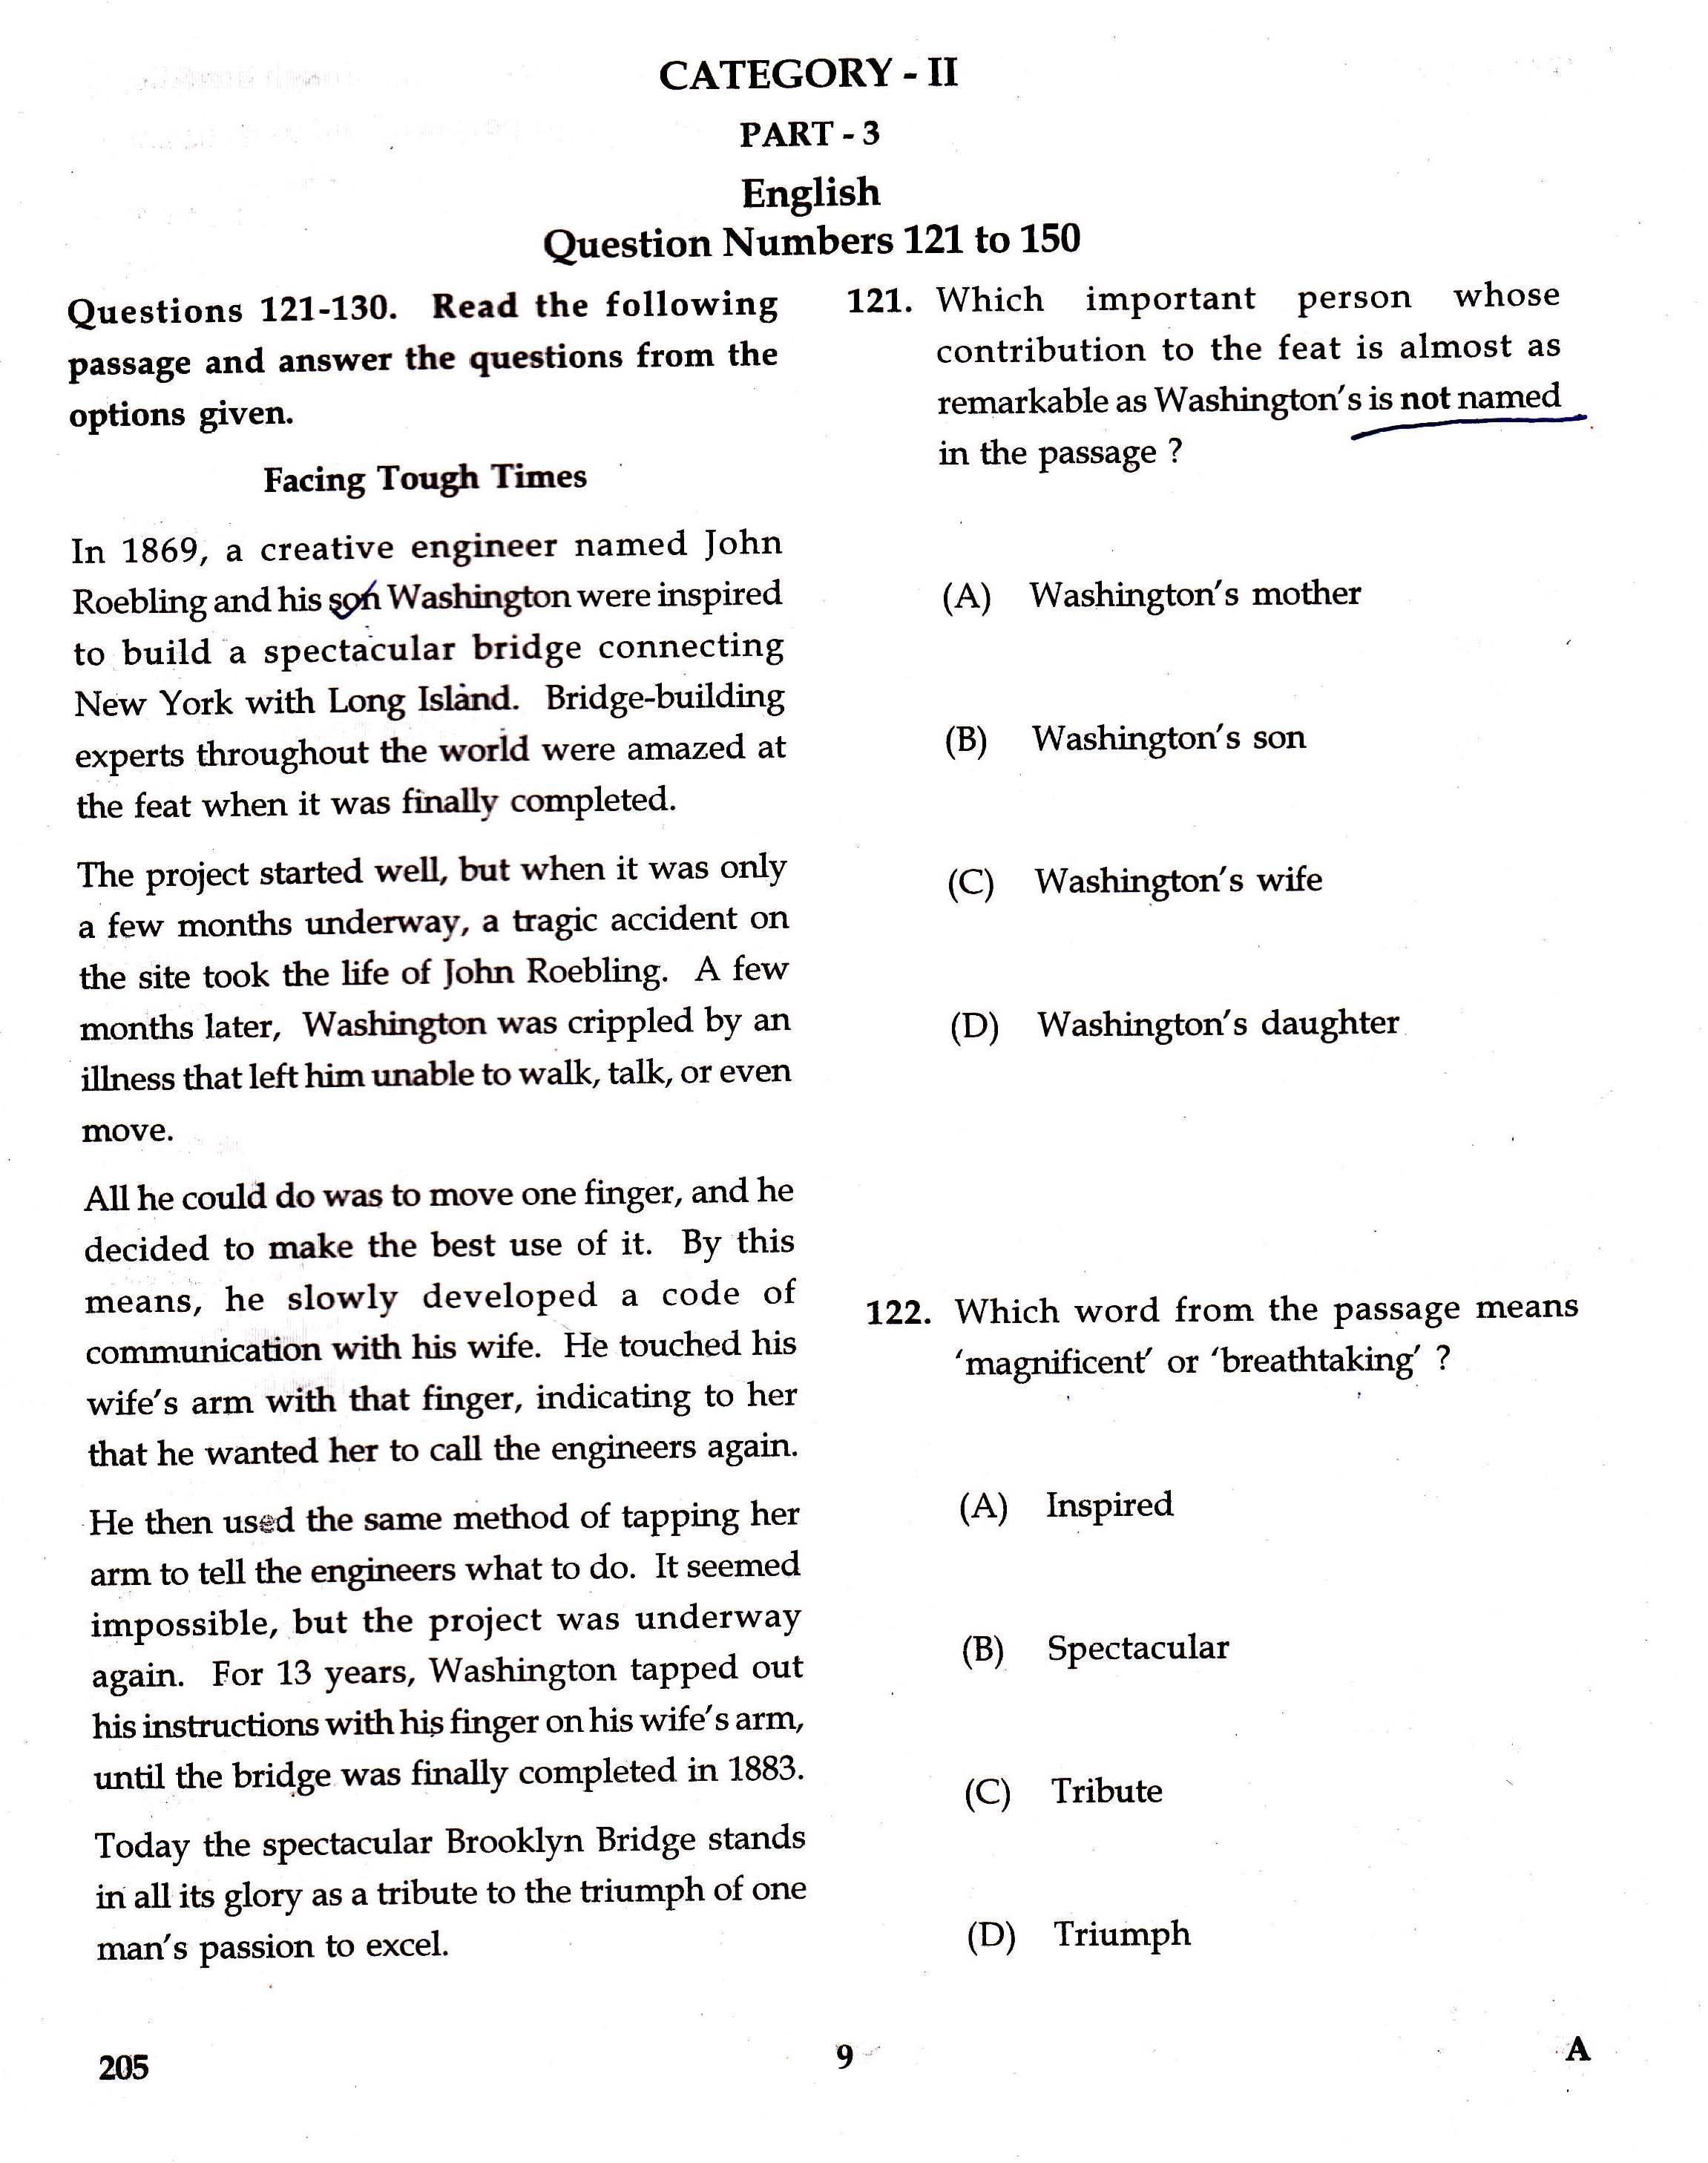 KTET Category II Part 3 English Question Paper with Answers August 2017 1